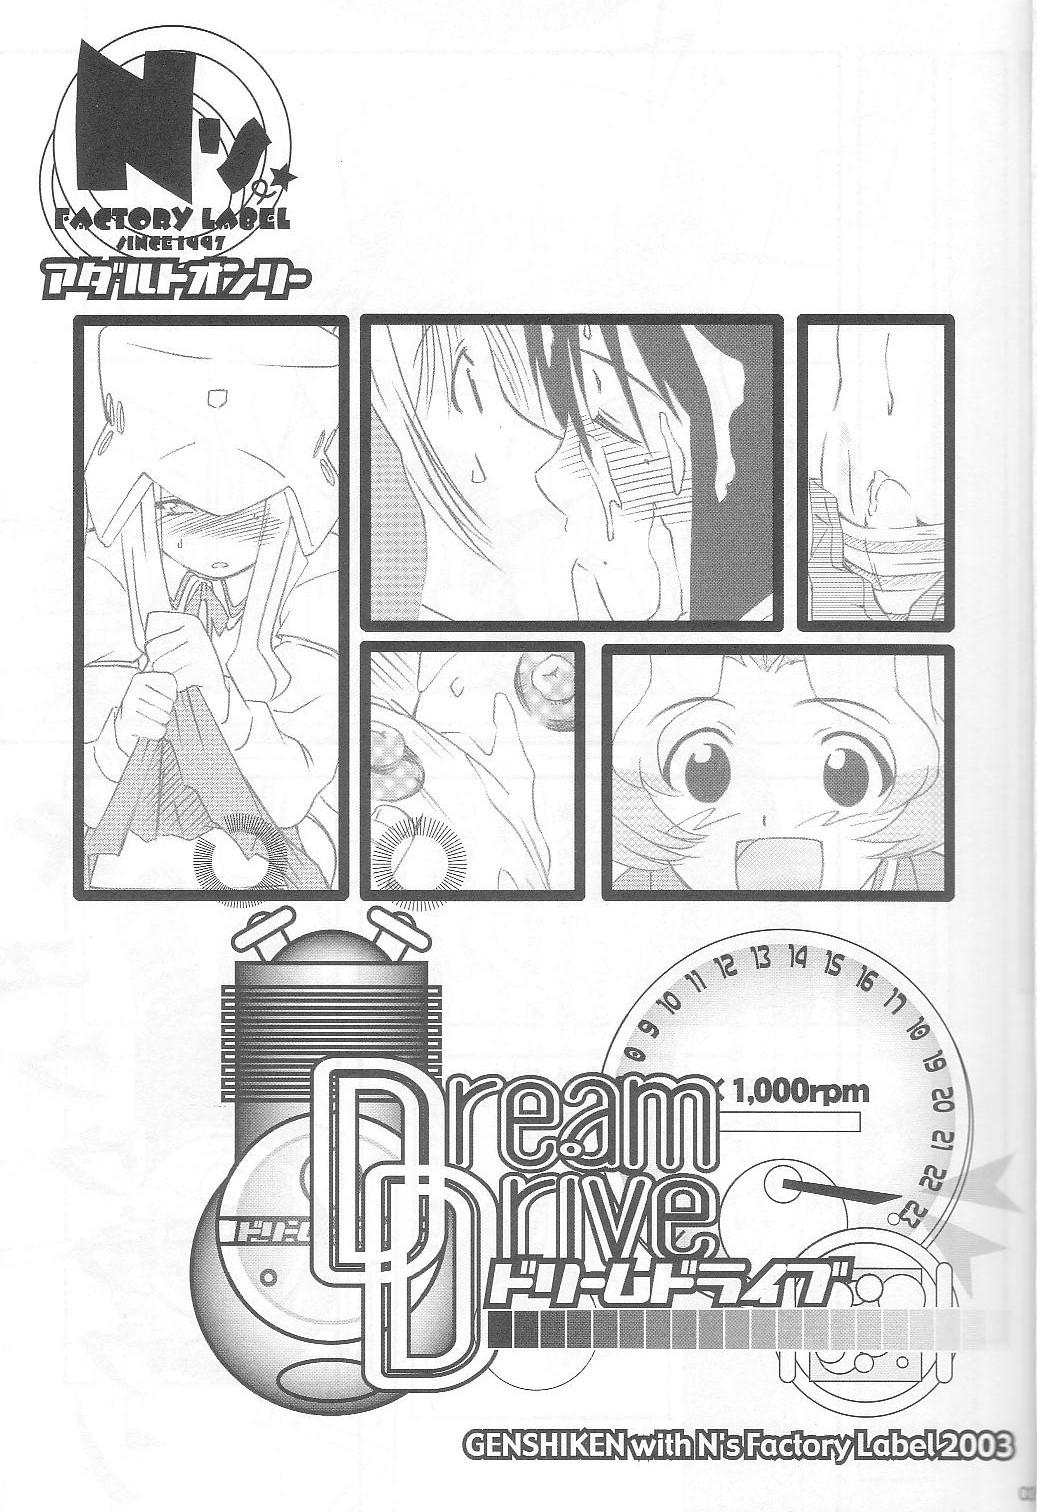 Foreplay Dream Drive - Genshiken Amature Sex - Page 2